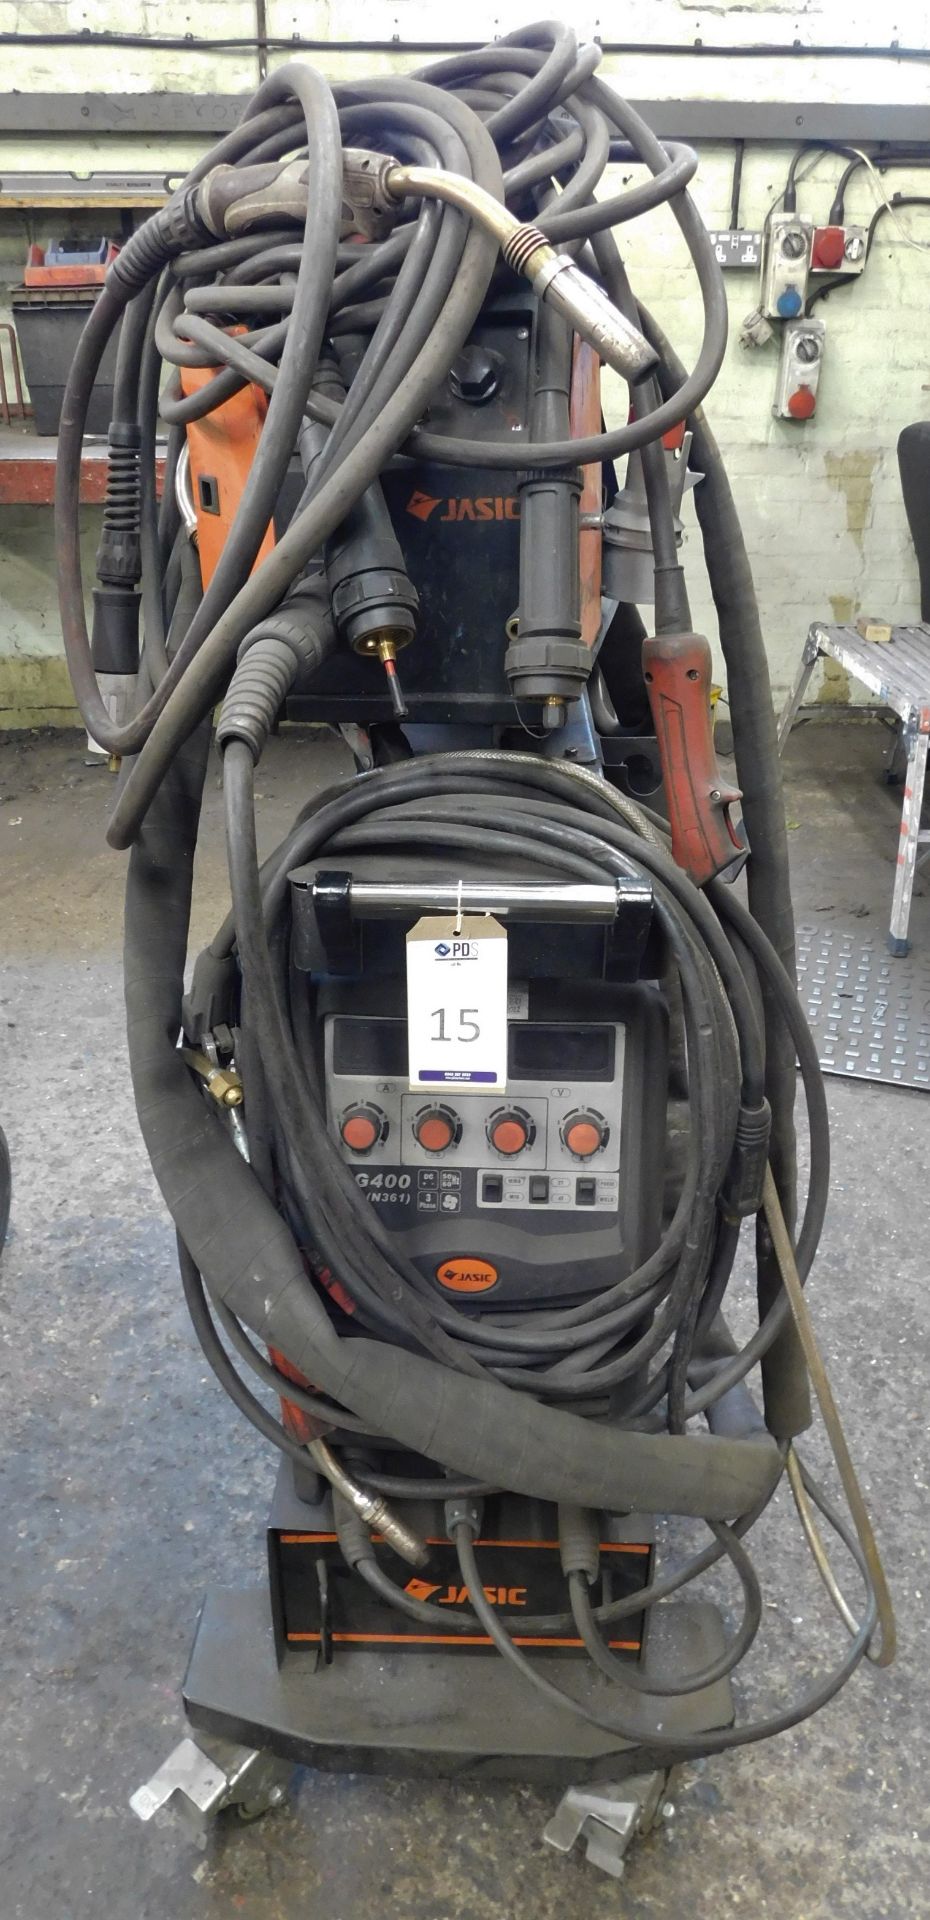 Jasic MIG 400 Mig Welder with Wire Feed (Location: Tottenham. Please Refer to General Notes)